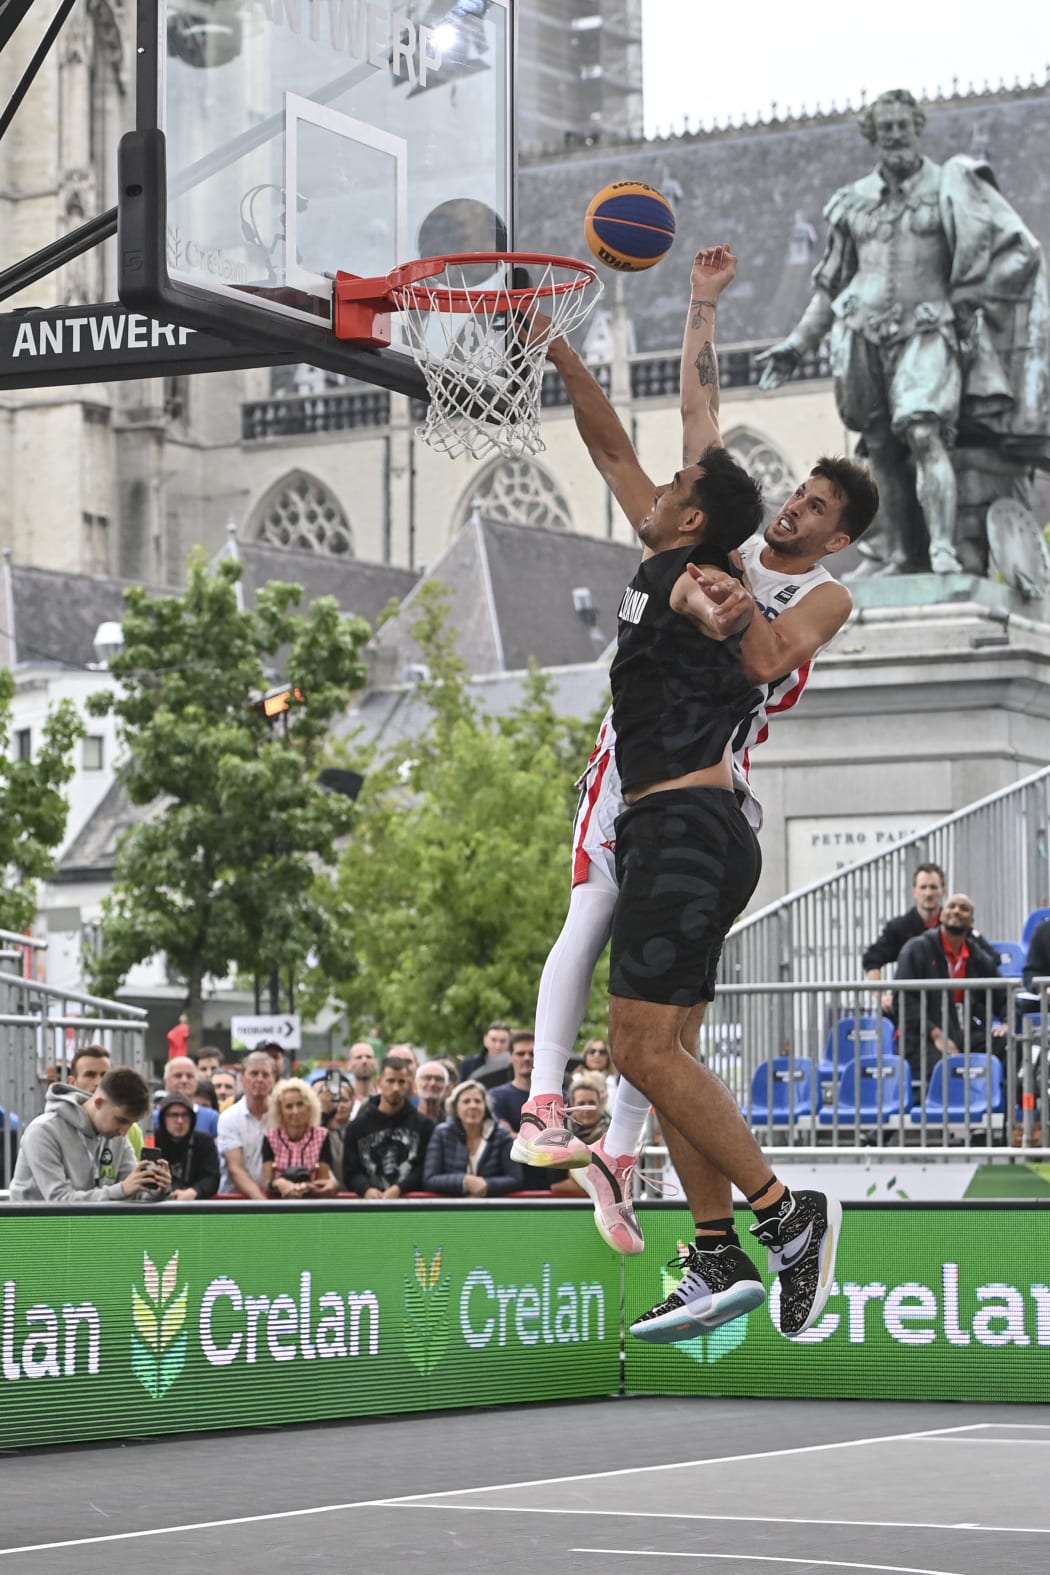 France's Franck Seguela (R) and New Zealand's Tai Wynyard fights for the ball during a 3x3 Basketball game between France and New Zealand, in the Men's qualifying round of the FIBA 2022 World Cup, on June 21, 2022. The tournament of The 2022 FIBA 3x3 World Cup runs between 21 and 26 June 2022 in Antwerp, Belgium. (Photo by DIRK WAEM / BELGA / AFP) / Belgium OUT